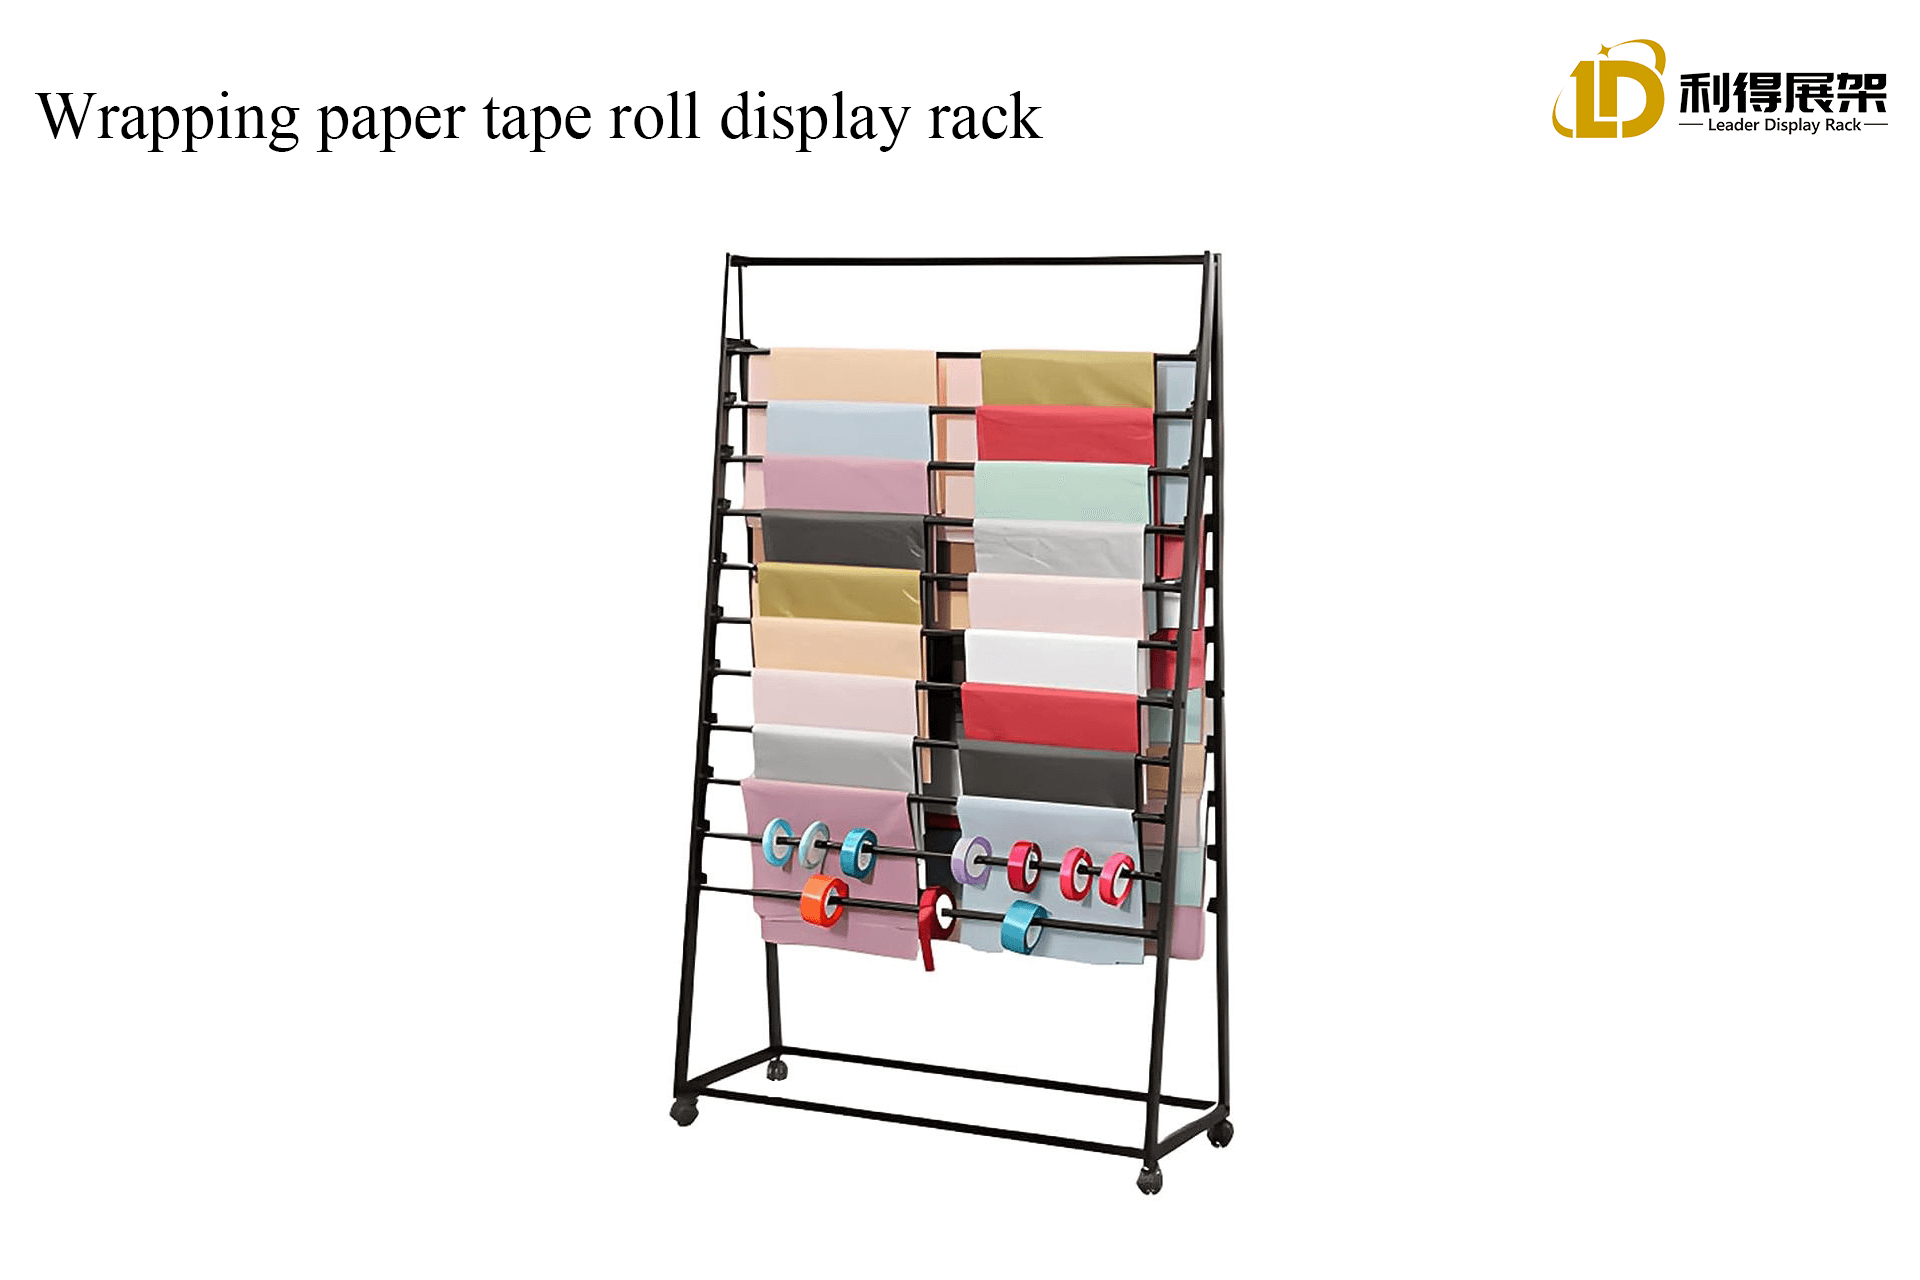 Excellent Material, Exquisite Technology, Wrapping Paper Tape Roll Display Rack Production And Characteristics